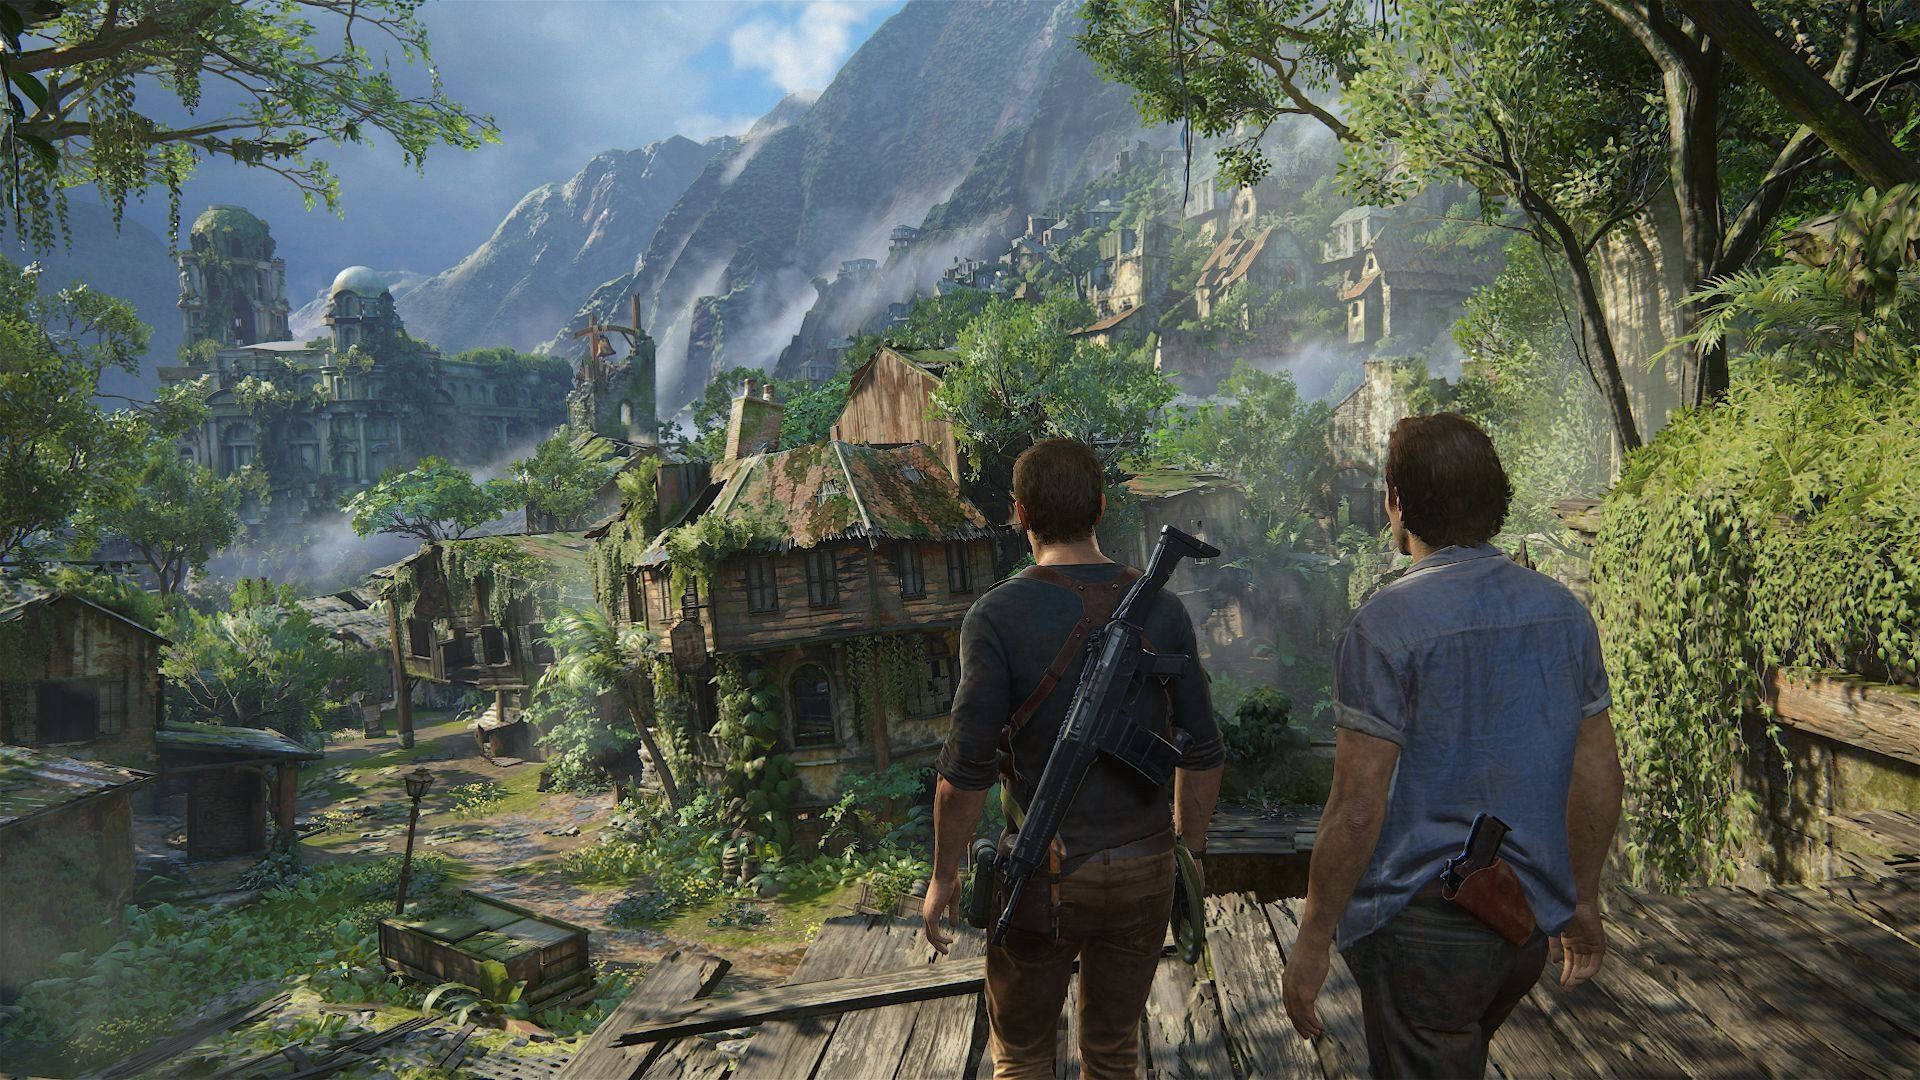 Exhilarating Adventure In Uncharted Game Village Background